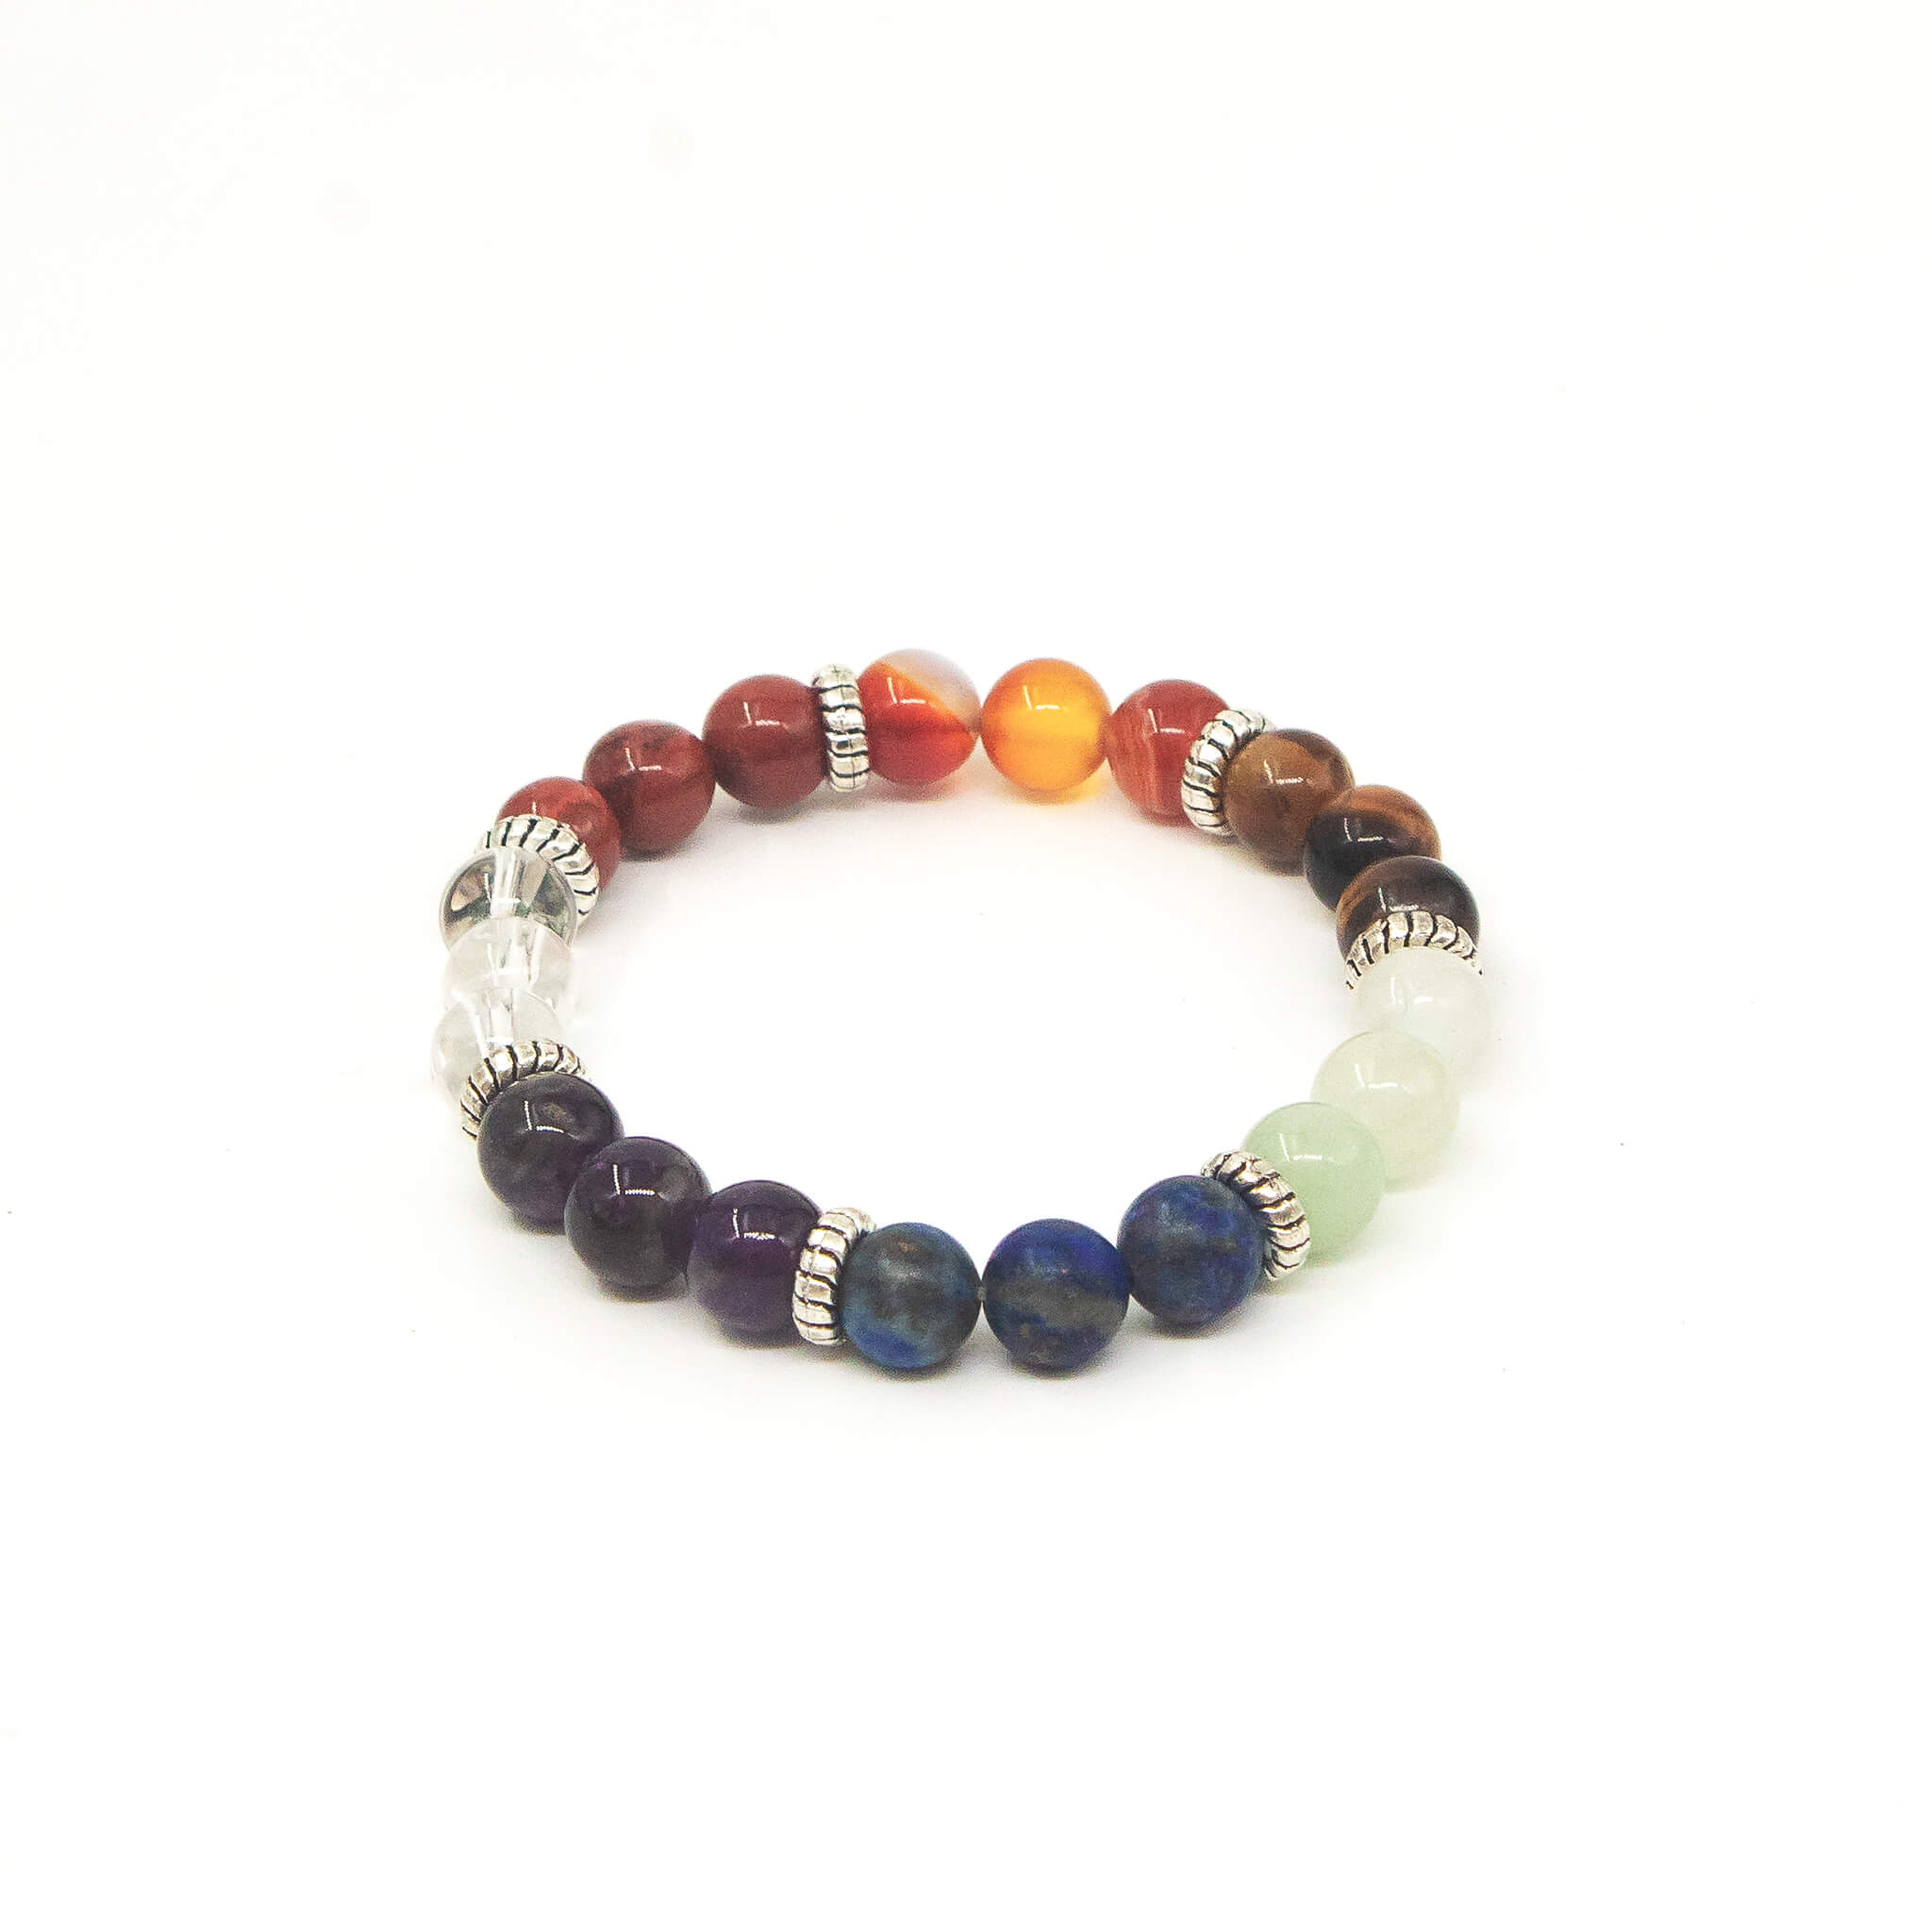 7 Chakra bracelet made of natural materials that feature the seven chakras,  , onyx, and reiki energy (Pack f 1) -New